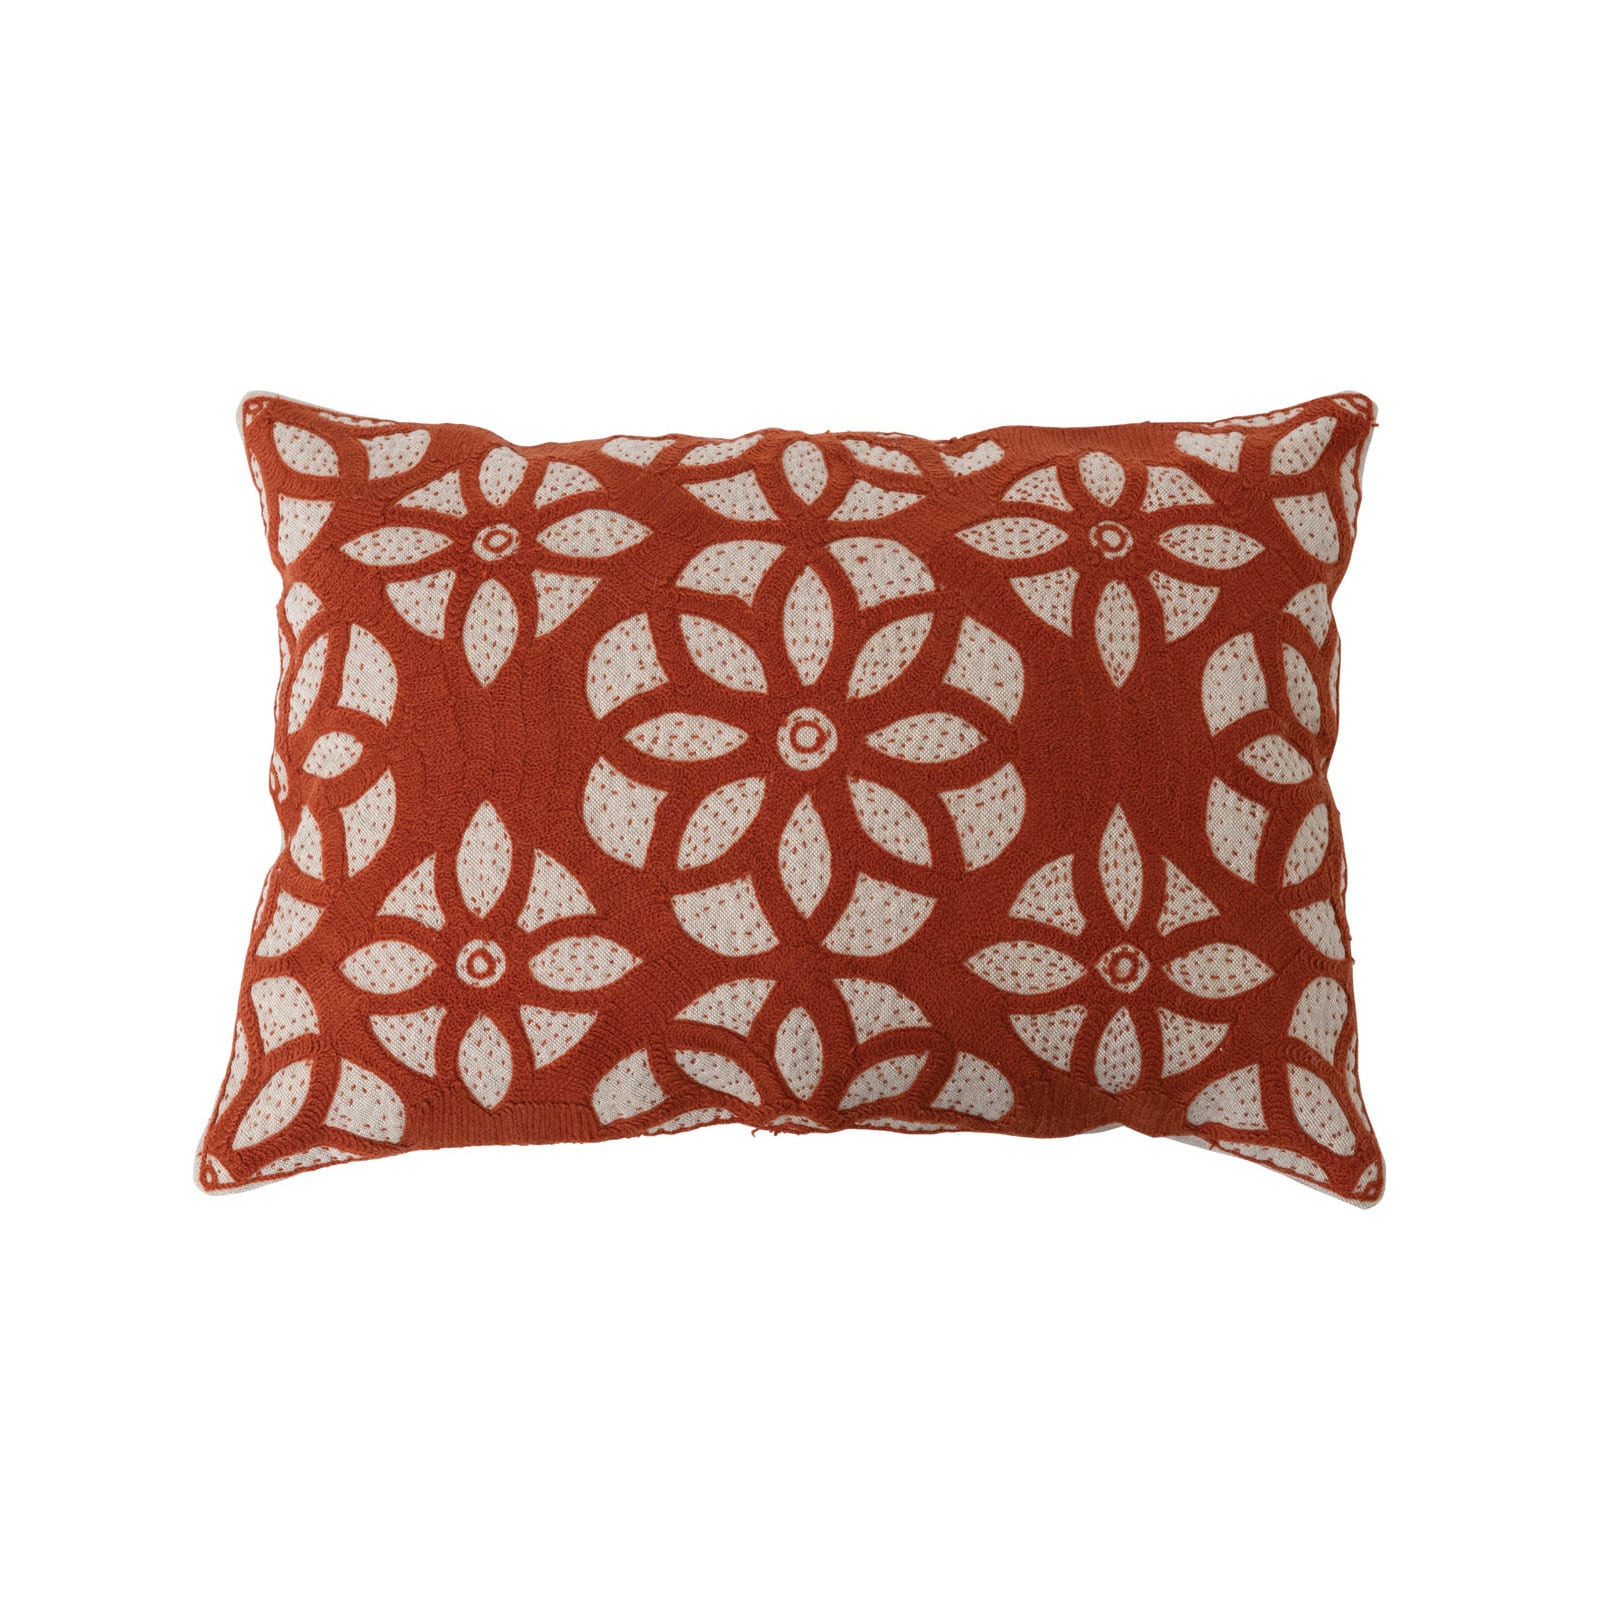 Cotton Lumbar Pillow With Embroidery